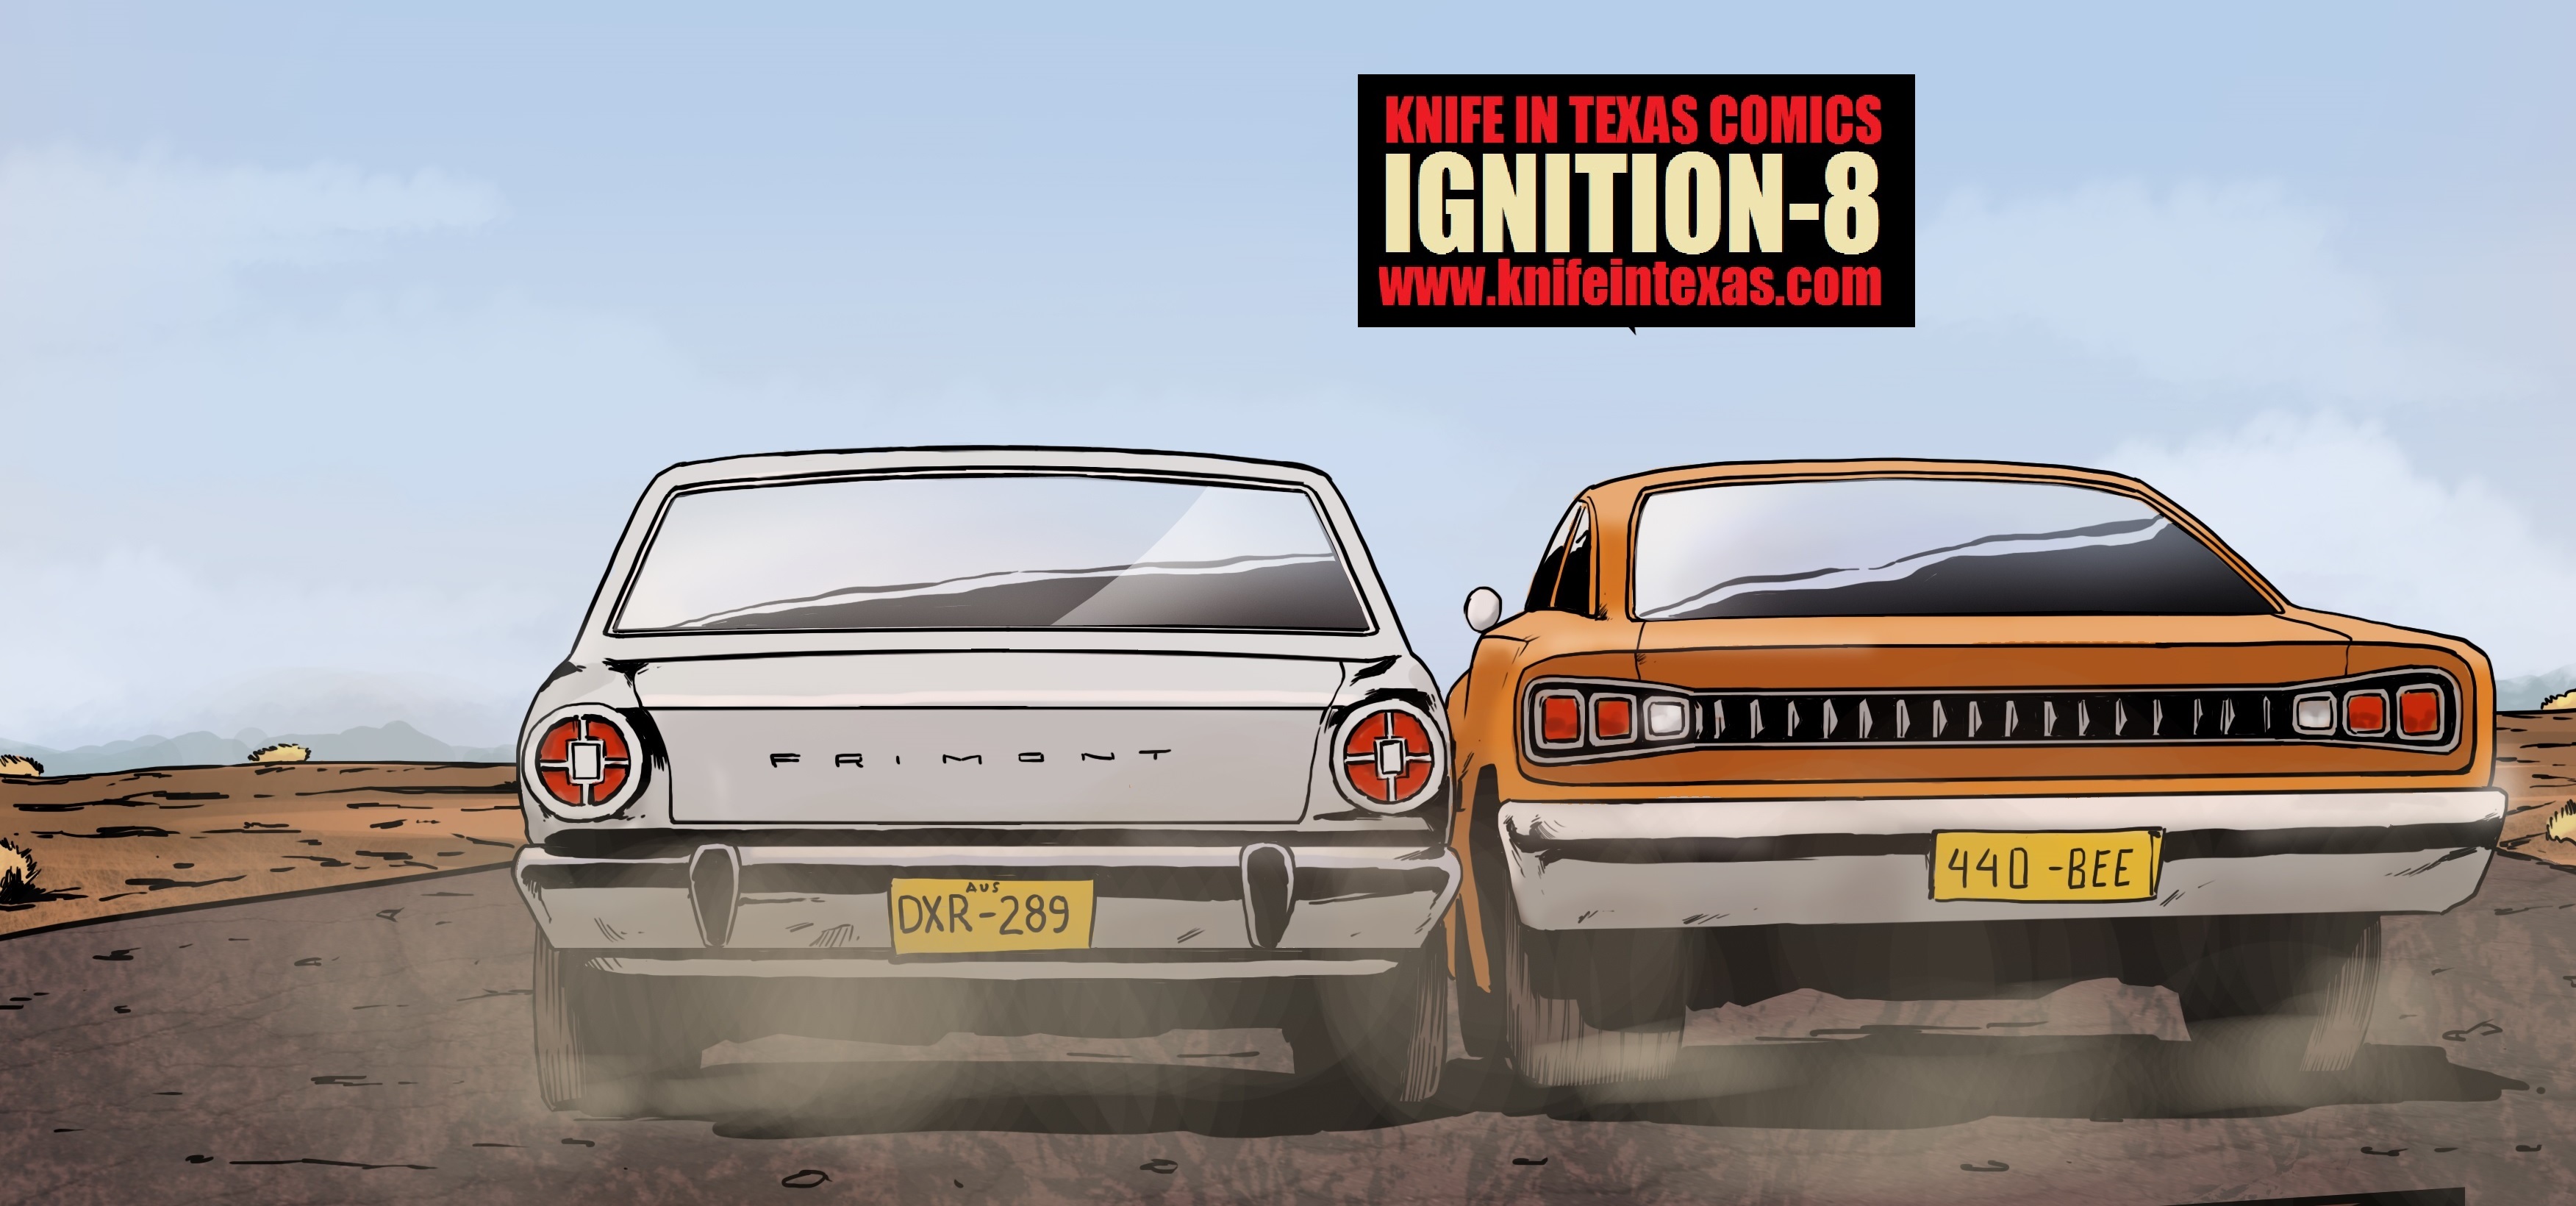 ARTWORK SNEAK PEEK from the forthcoming comic IGNITION-8